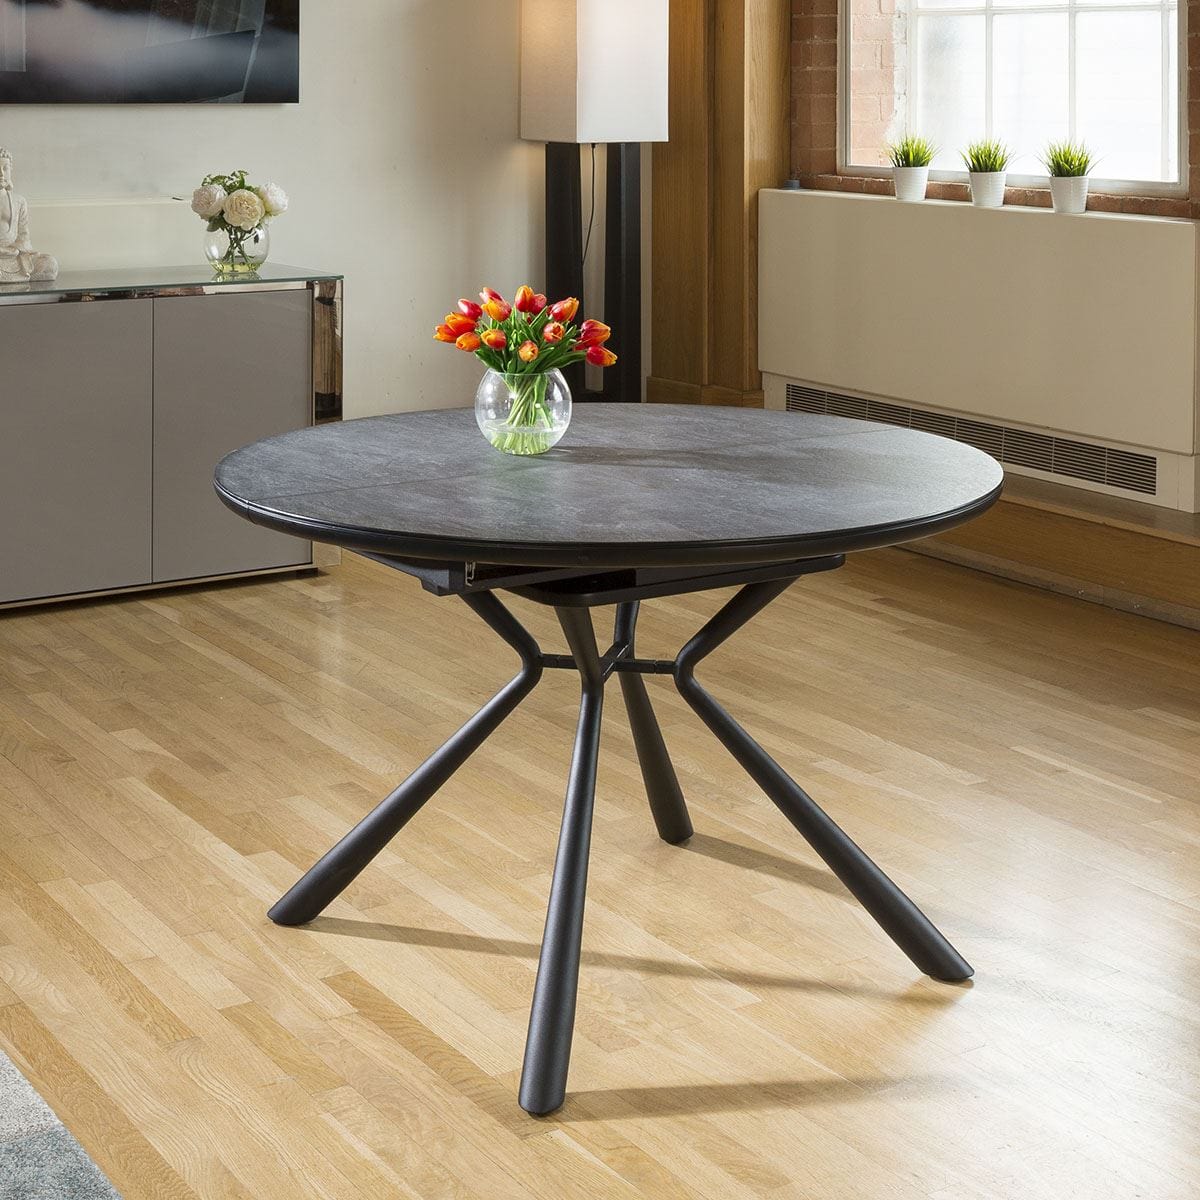 Quatropi Round Slate Effect Melamine Dining Table Extends +4 Grey Carver Chairs